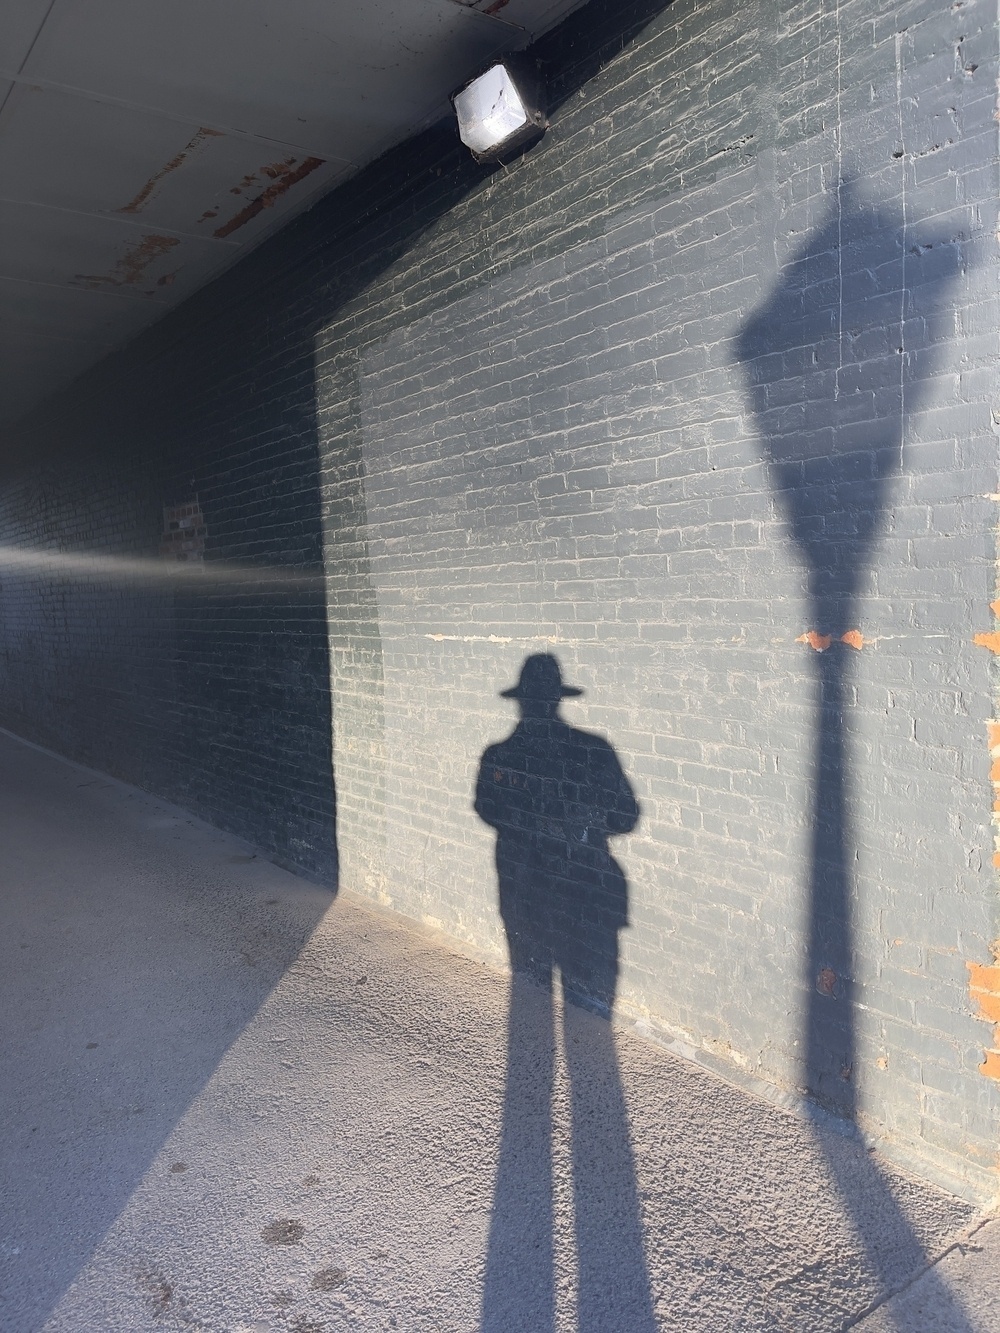 Shadow selfie with street lamp on a brick wall.